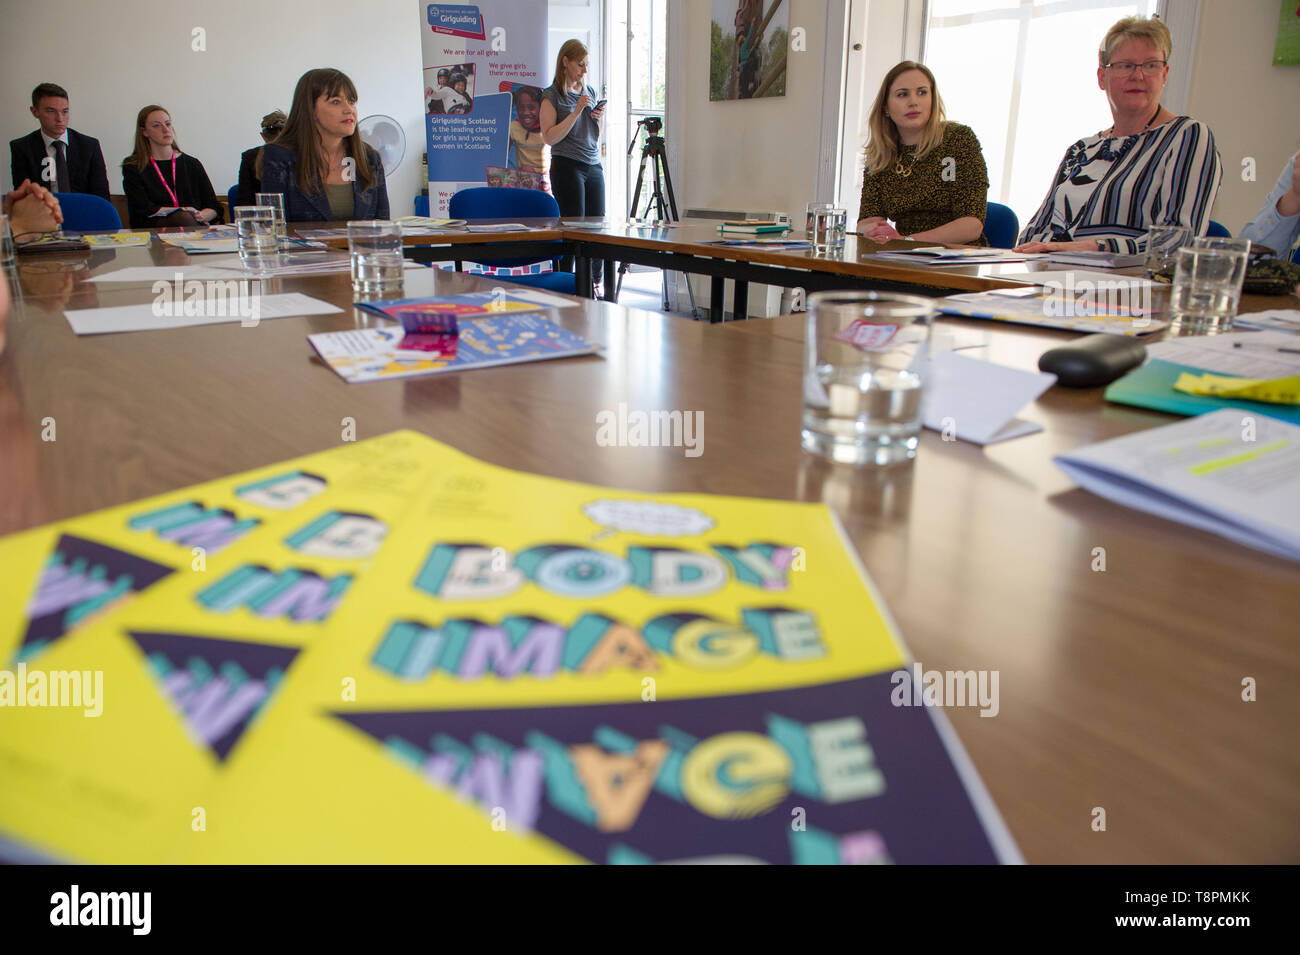 Edinburgh, UK. 14 May 2019. Mental Health Minister, Clare Haughey, joins Girlguiding Scotland members at Girlguiding HQ to discuss the impact of body image on mental health and wellbeing.  Ms Haughey announces the remit of the new Advisory Group on MEntal Body Image, which will identify steps to improve support for young people.  The Minister meets with Girlguides of all ages to discuss their experience of body image and how this can affect their mental health, and about any other pressures that impact them. Credit: Colin Fisher/Alamy Live News. Stock Photo